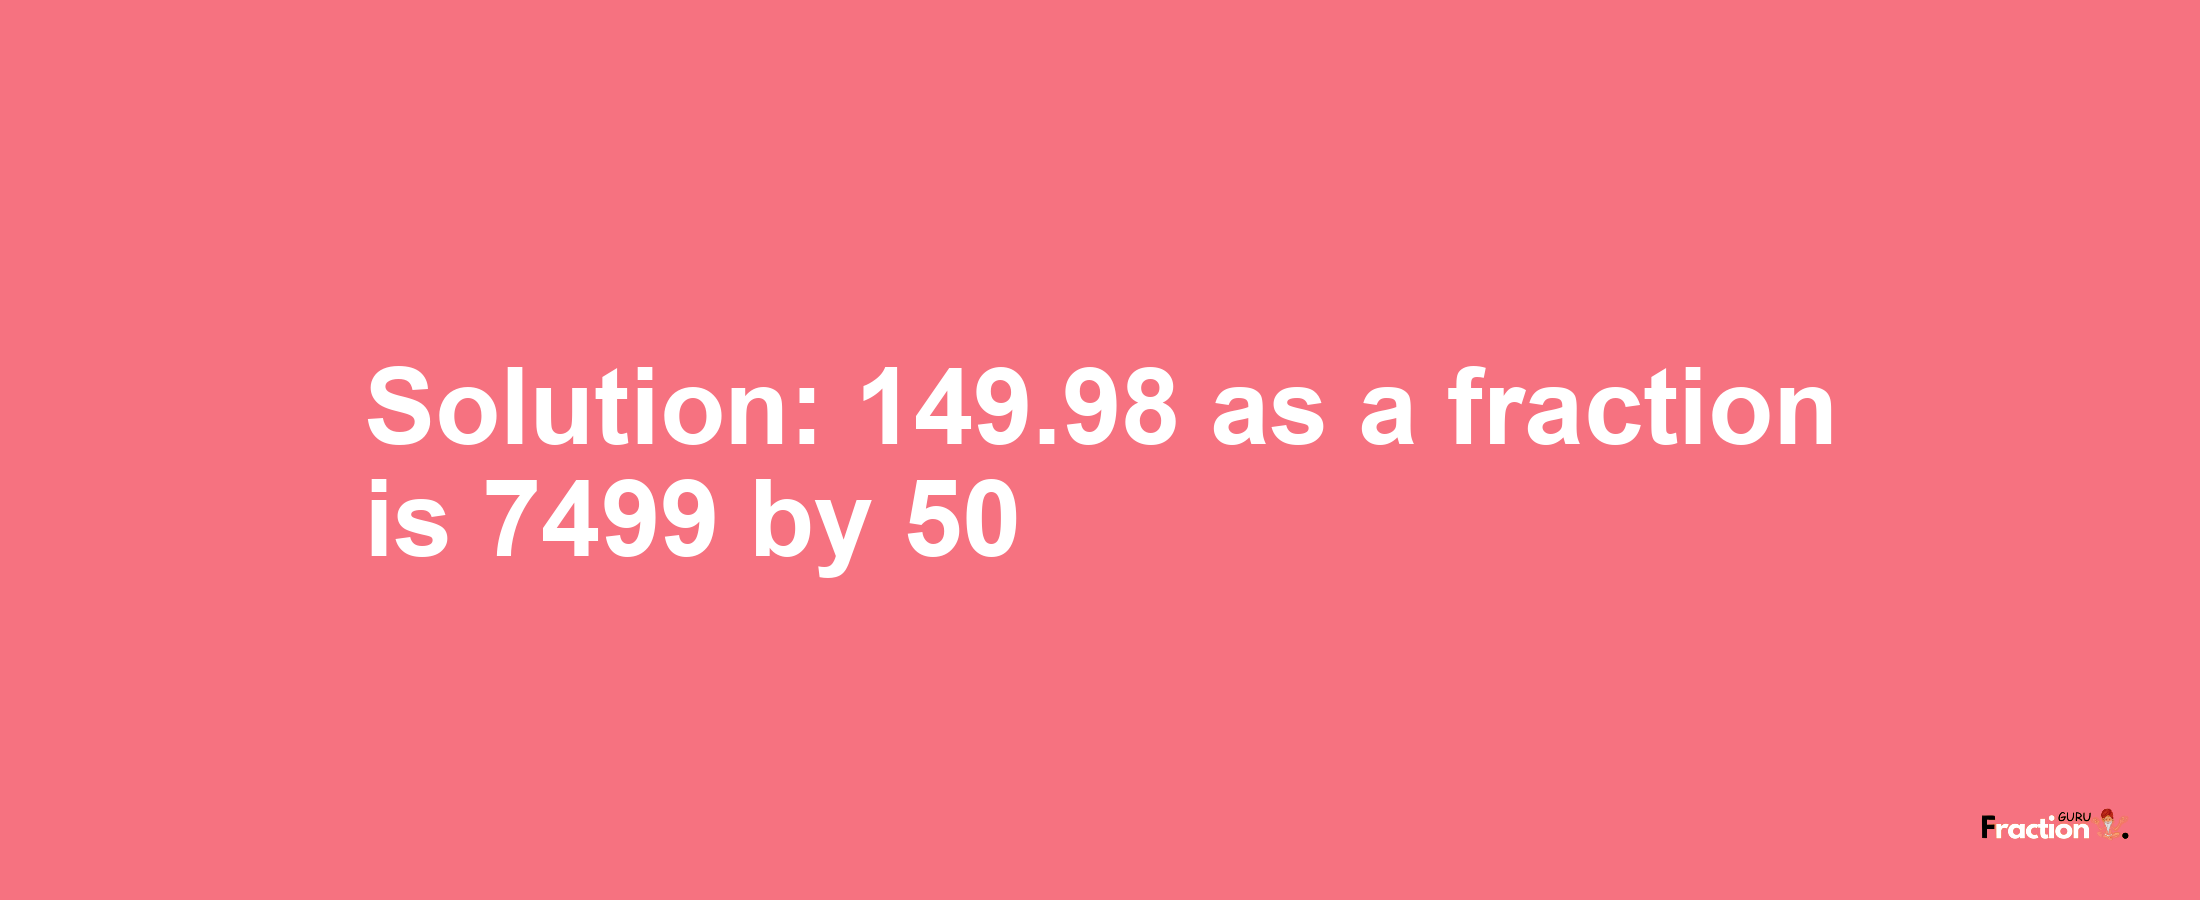 Solution:149.98 as a fraction is 7499/50